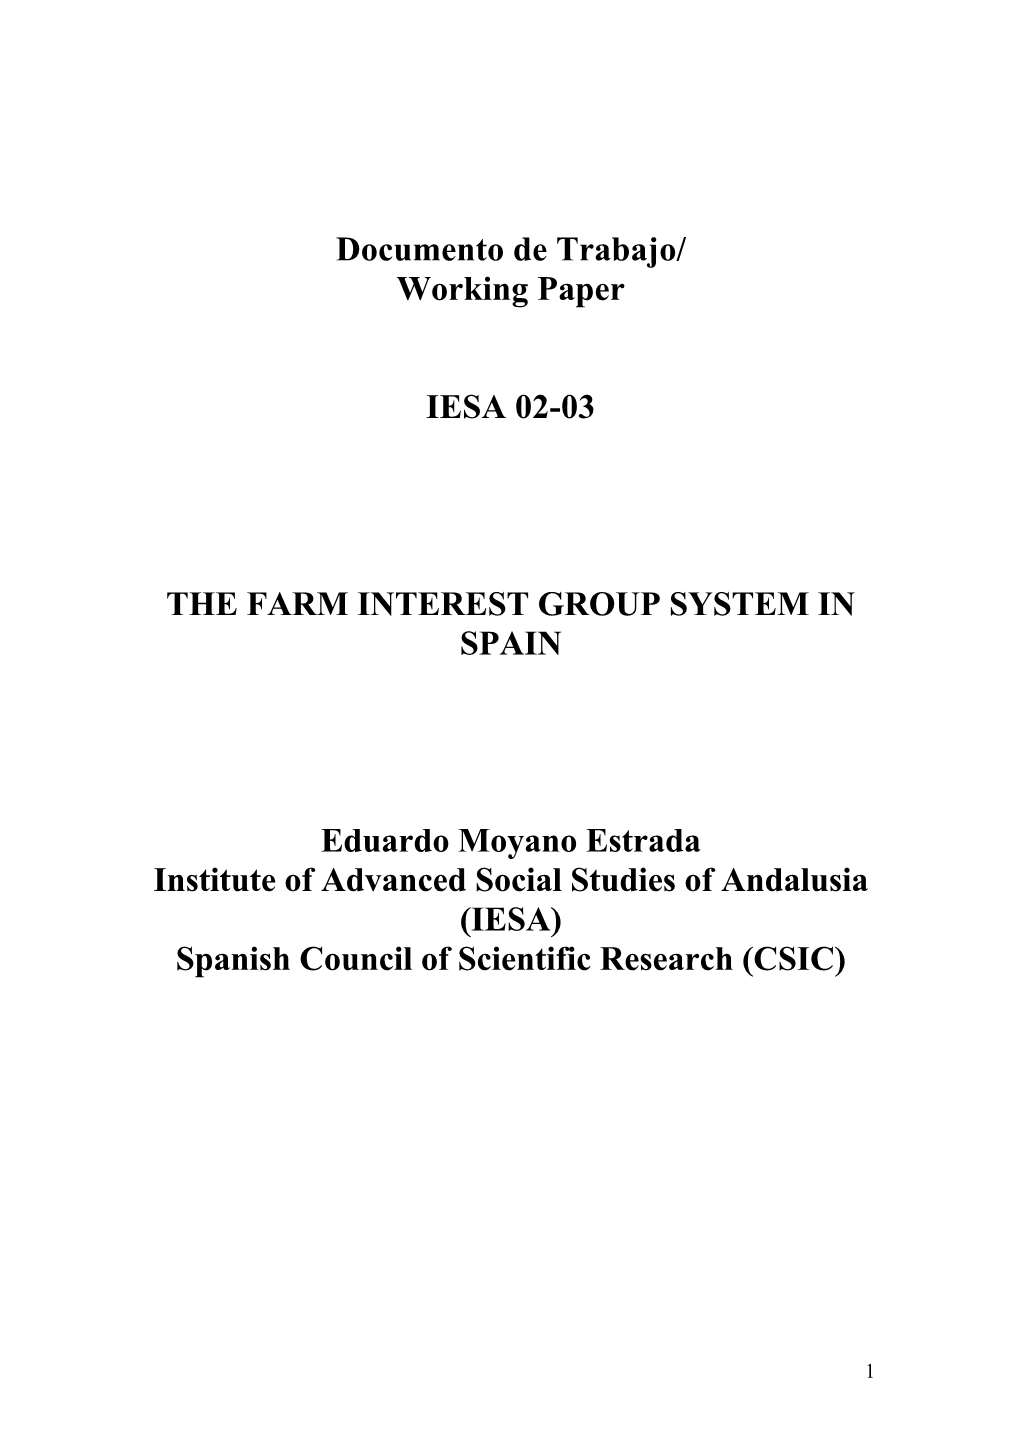 Working Paper IESA 02-03 the FARM INTEREST GROUP SYSTEM